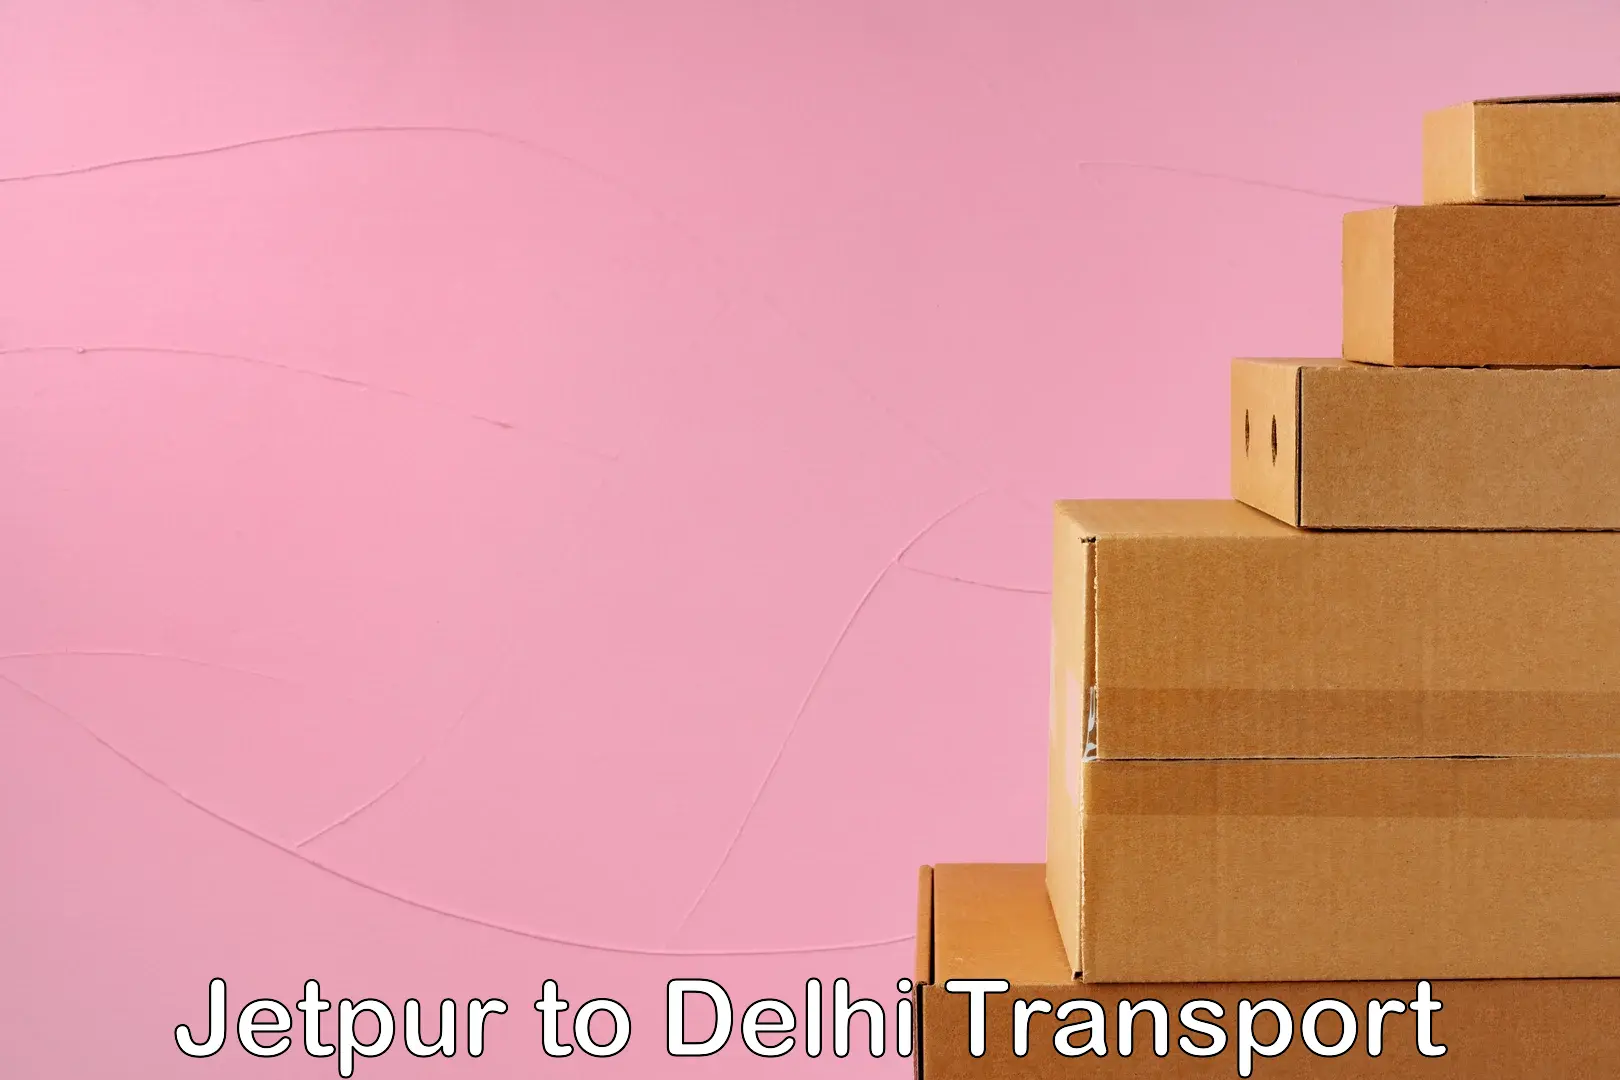 Domestic goods transportation services Jetpur to Lodhi Road